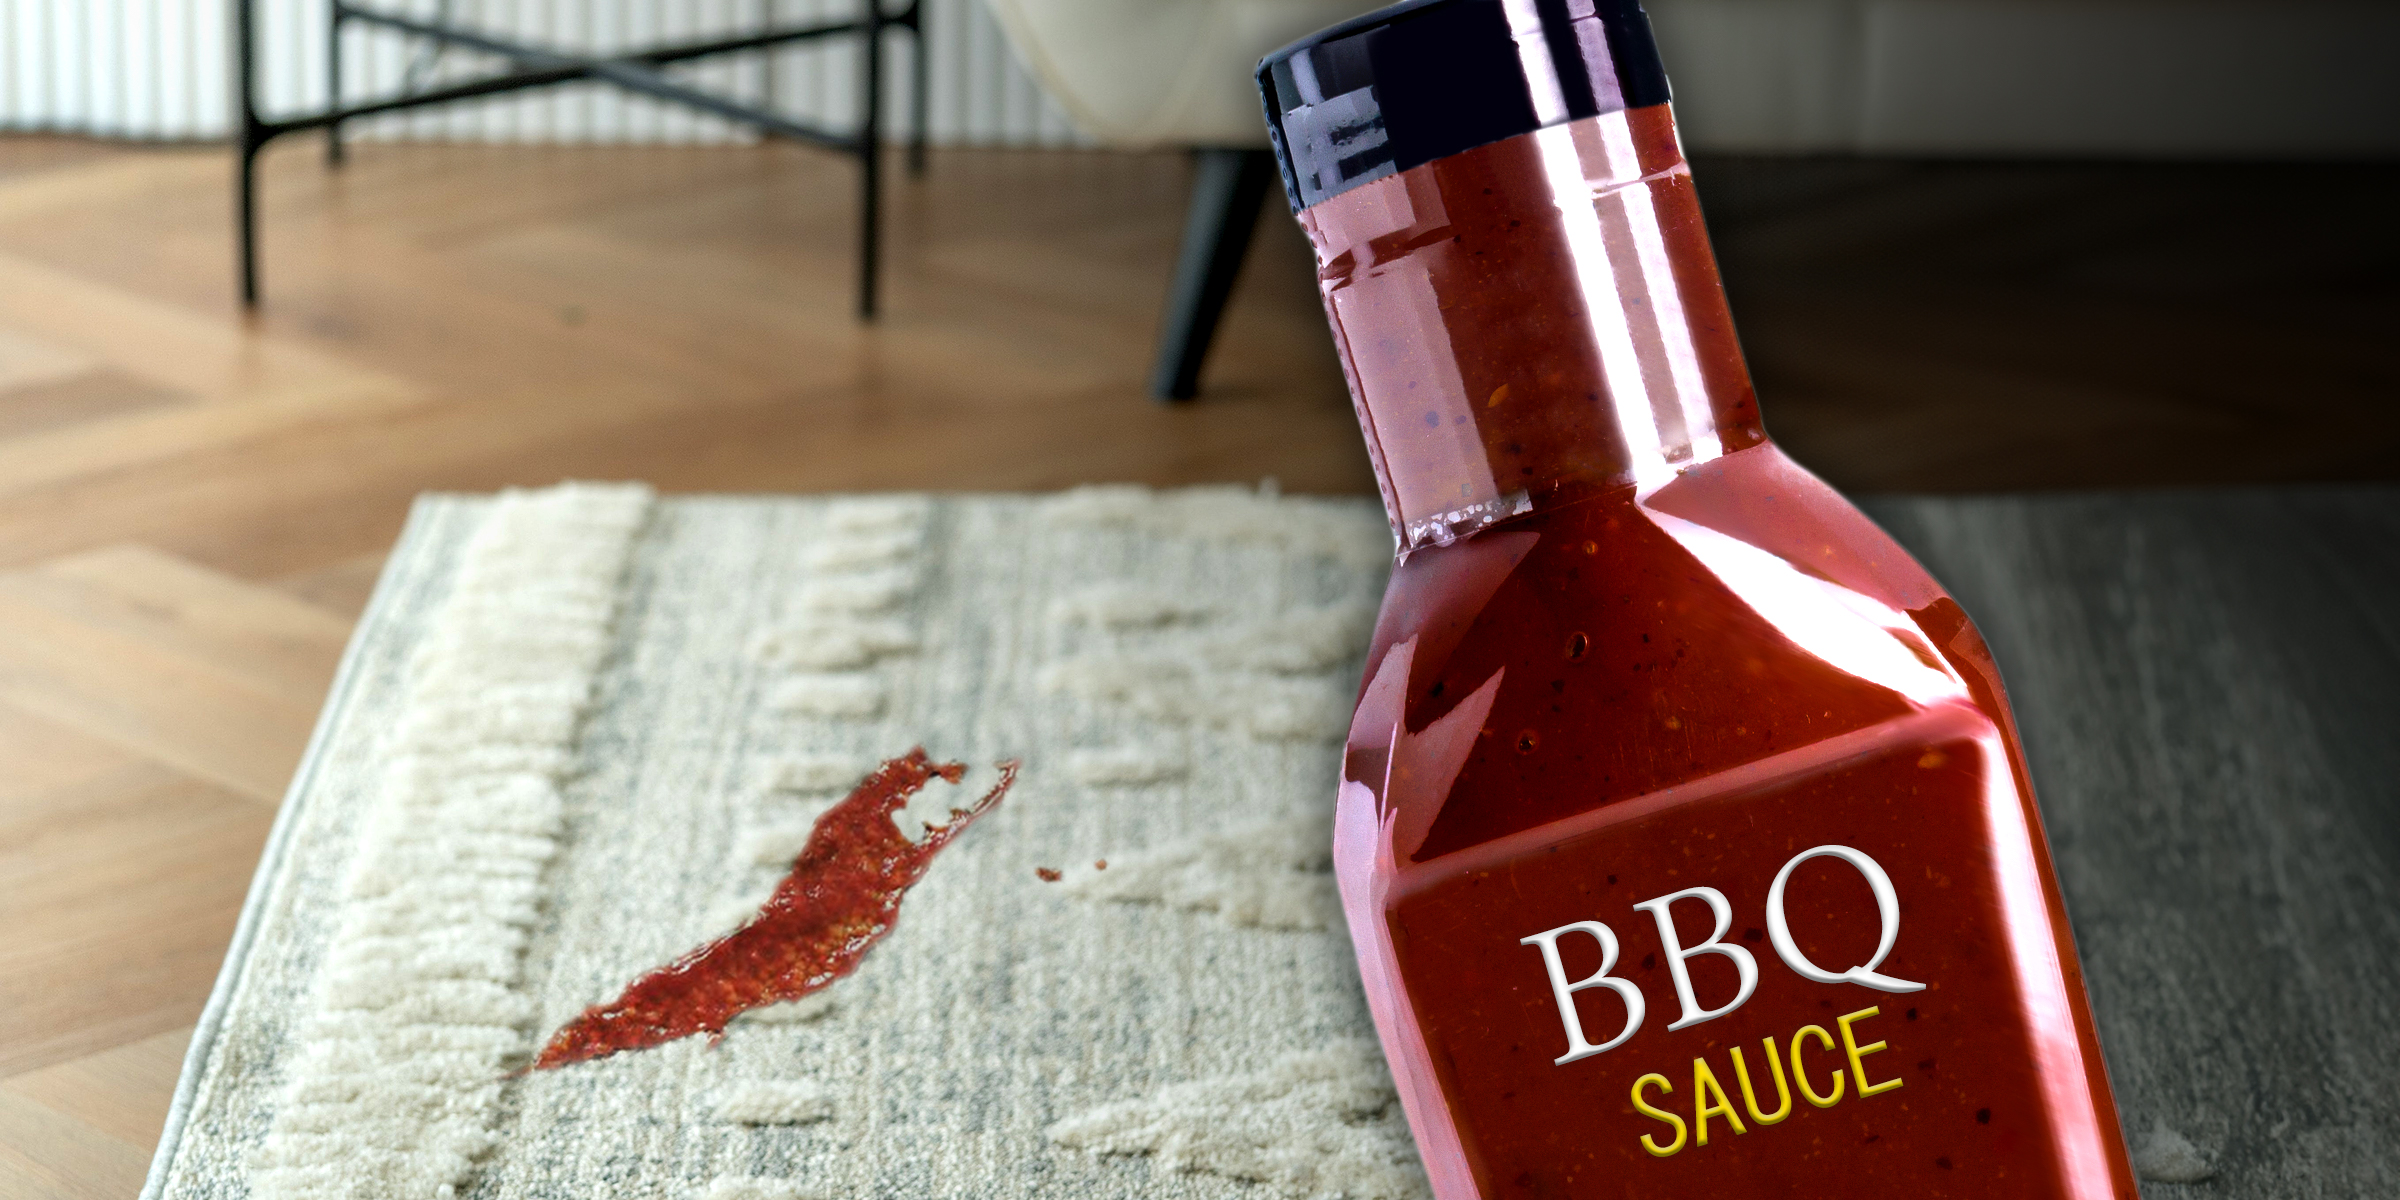 Carpet with a BBQ sauce stain | Source: Source: Pexels/Atul Mohan | Shutterstock